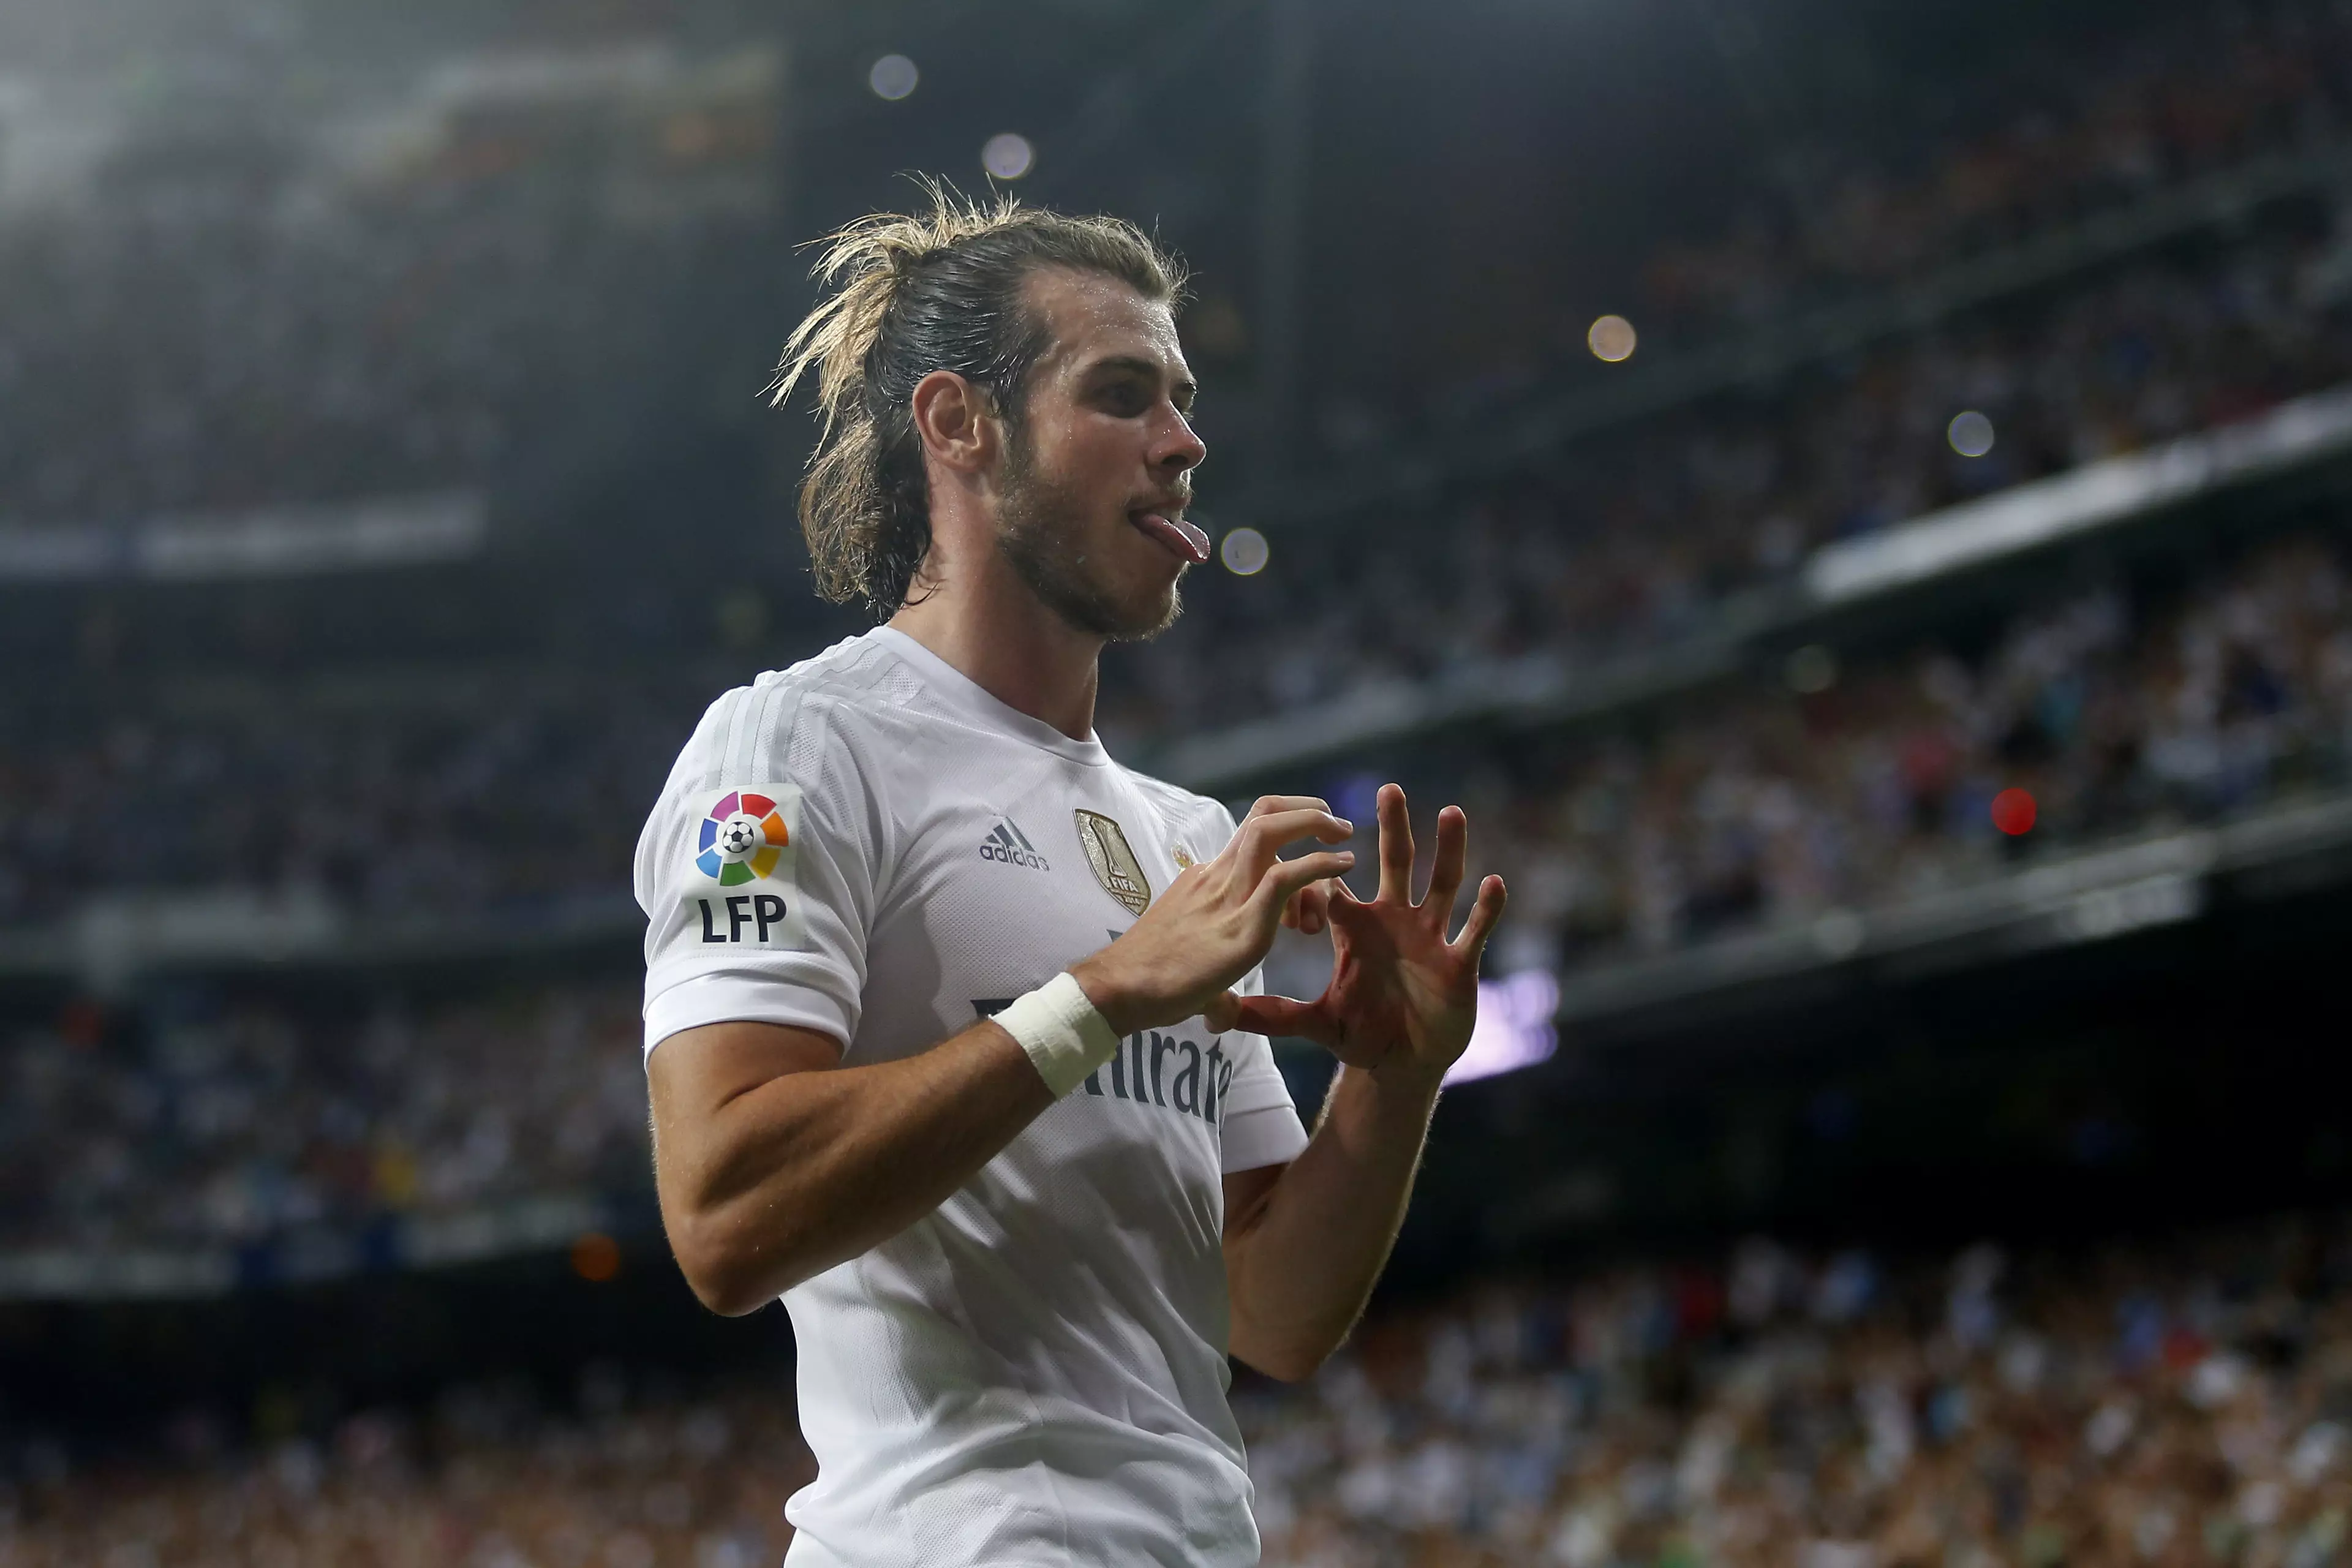 Bale cost Real a world record fee at the time of his signing. Image: PA Images